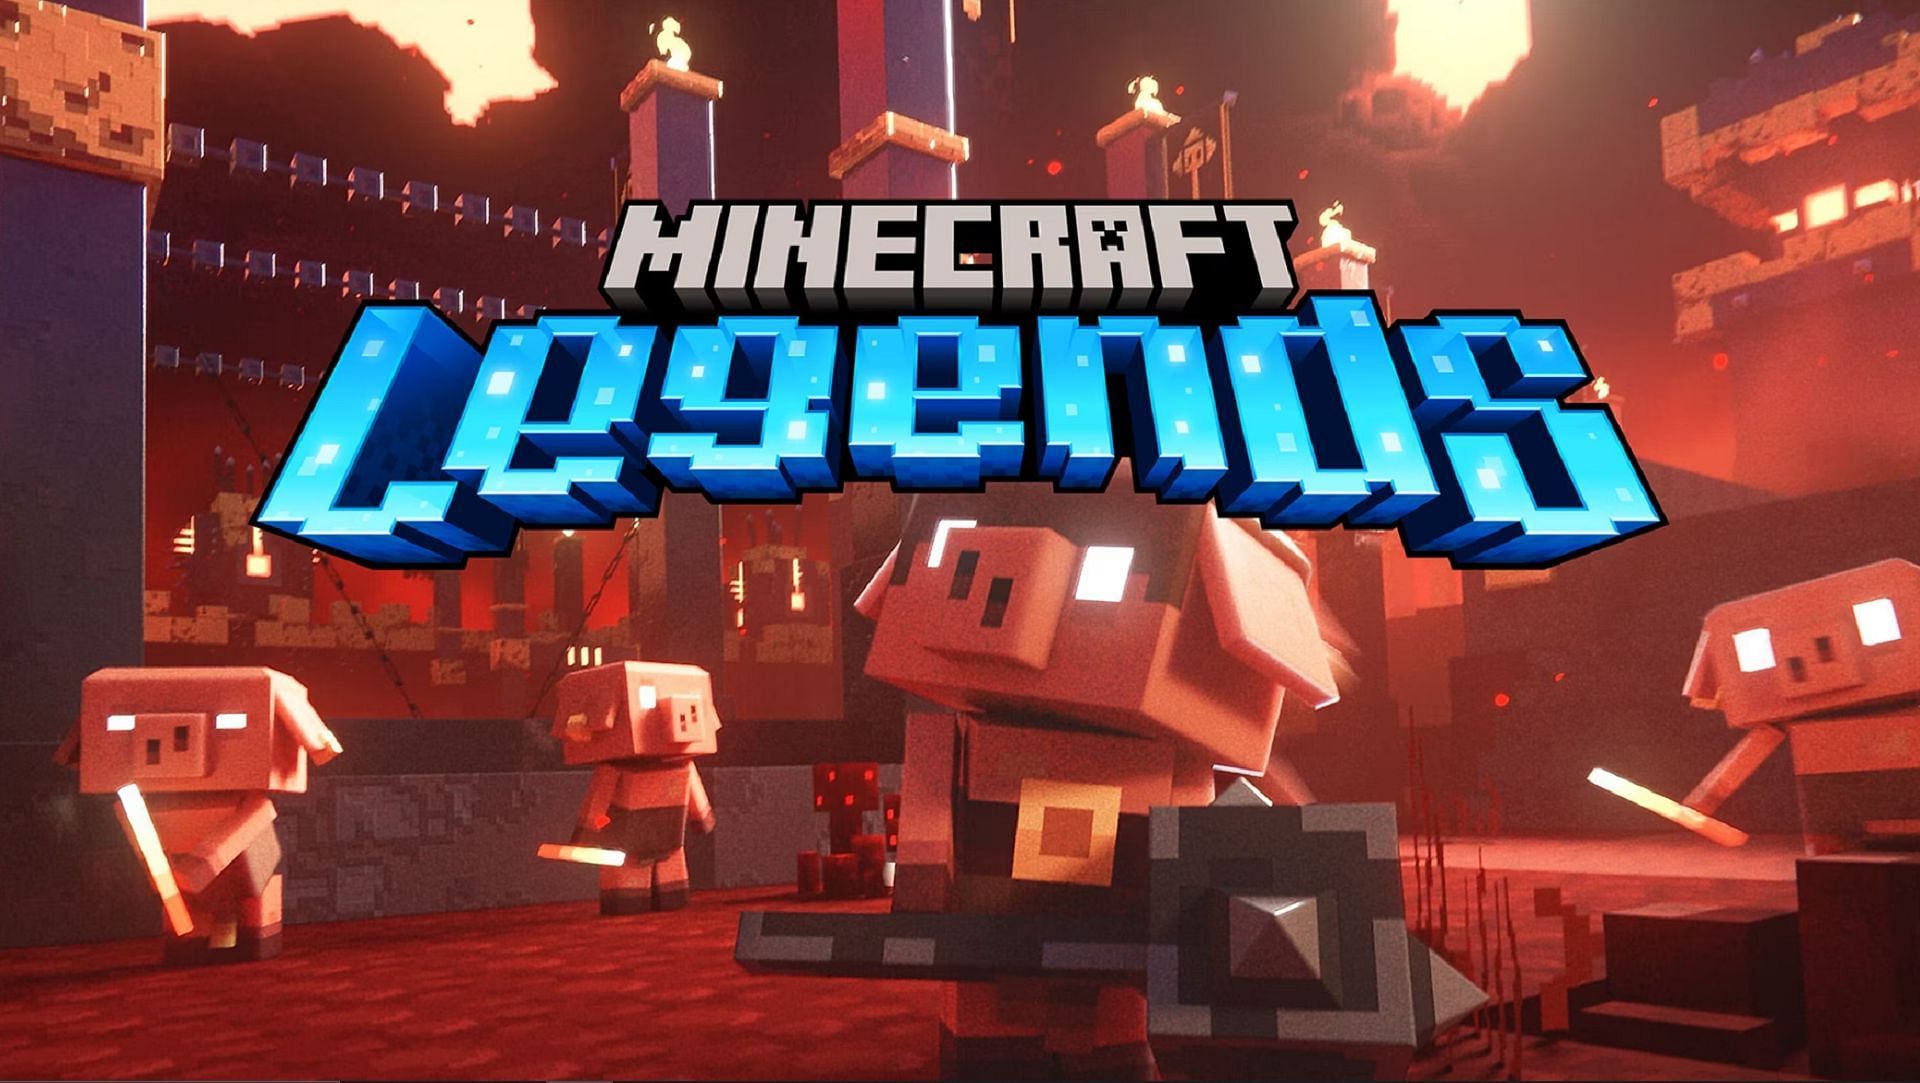 NEW FEATRES in Minecraft Legends update 1.17.49848!! (What's New